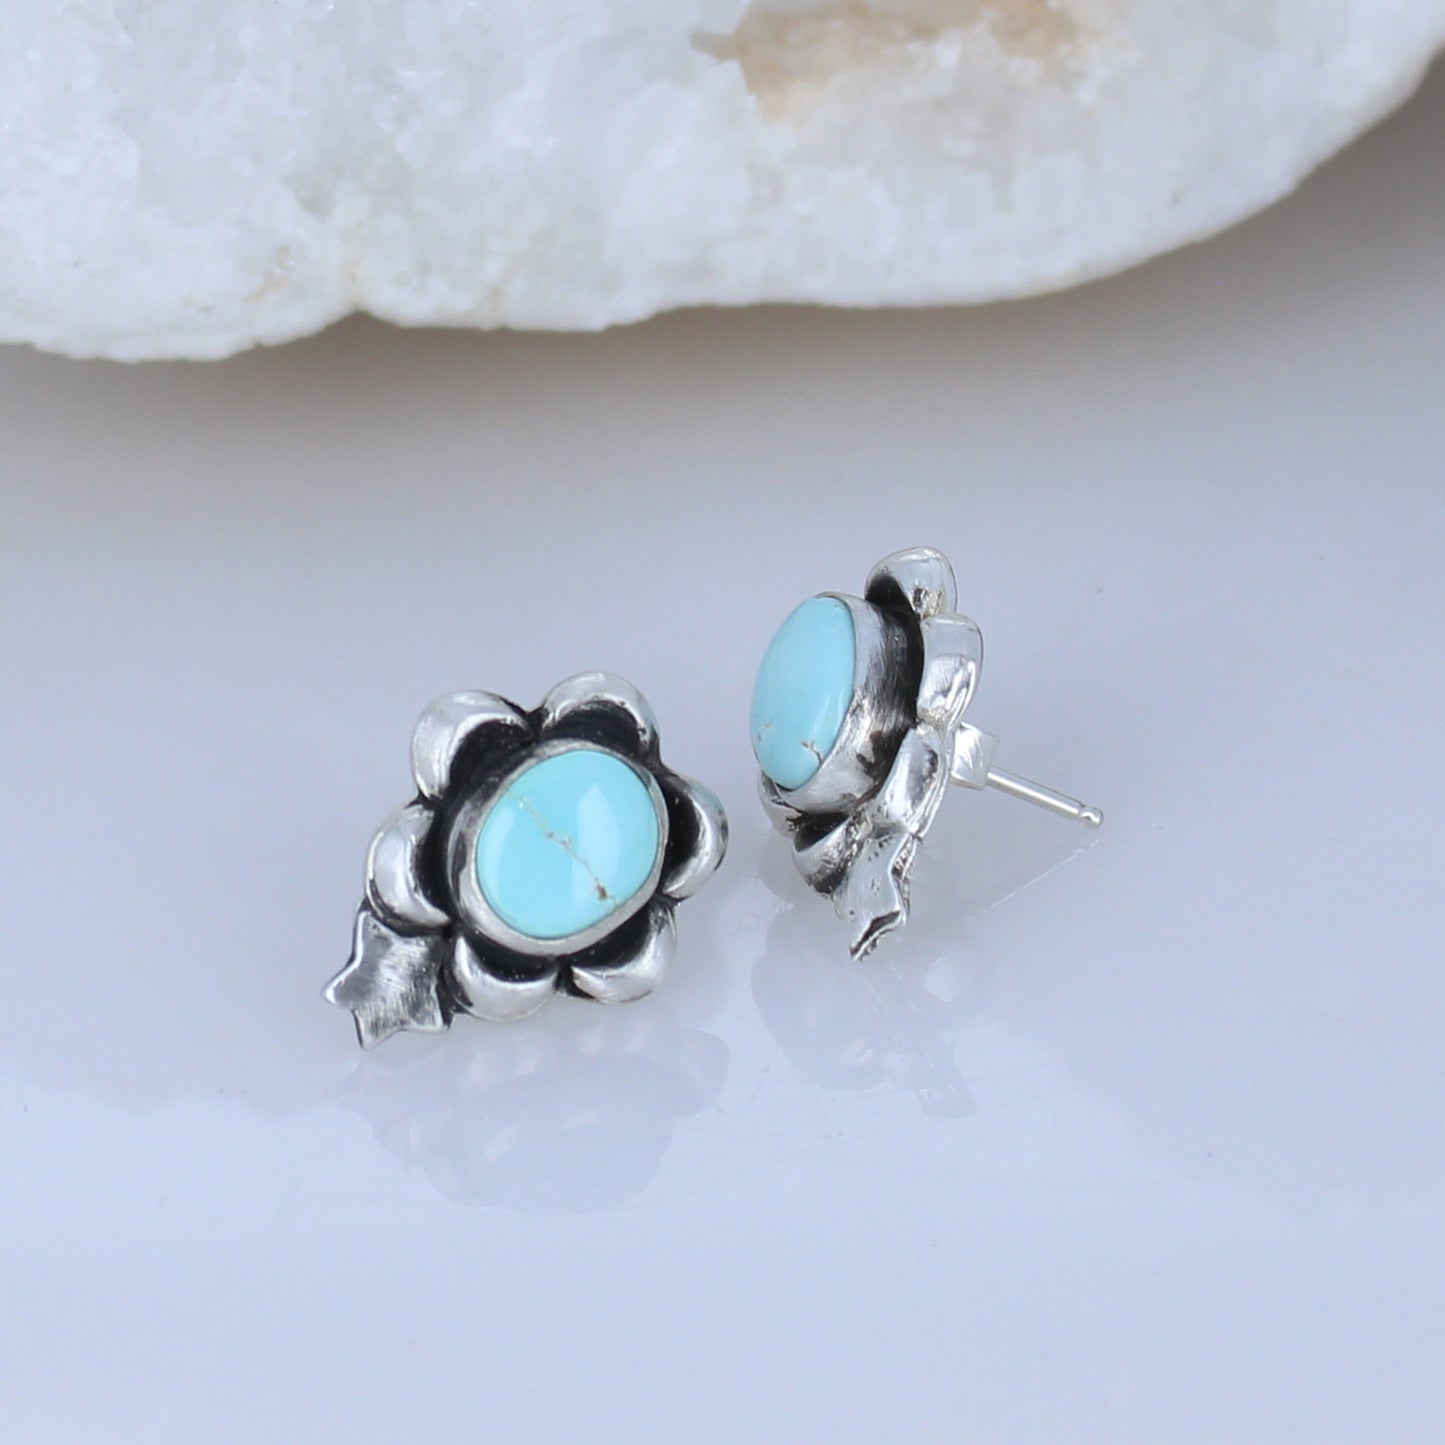 Many Moons Rare Dry Creek Turquoise Earrings Sterling -NewWorldGems